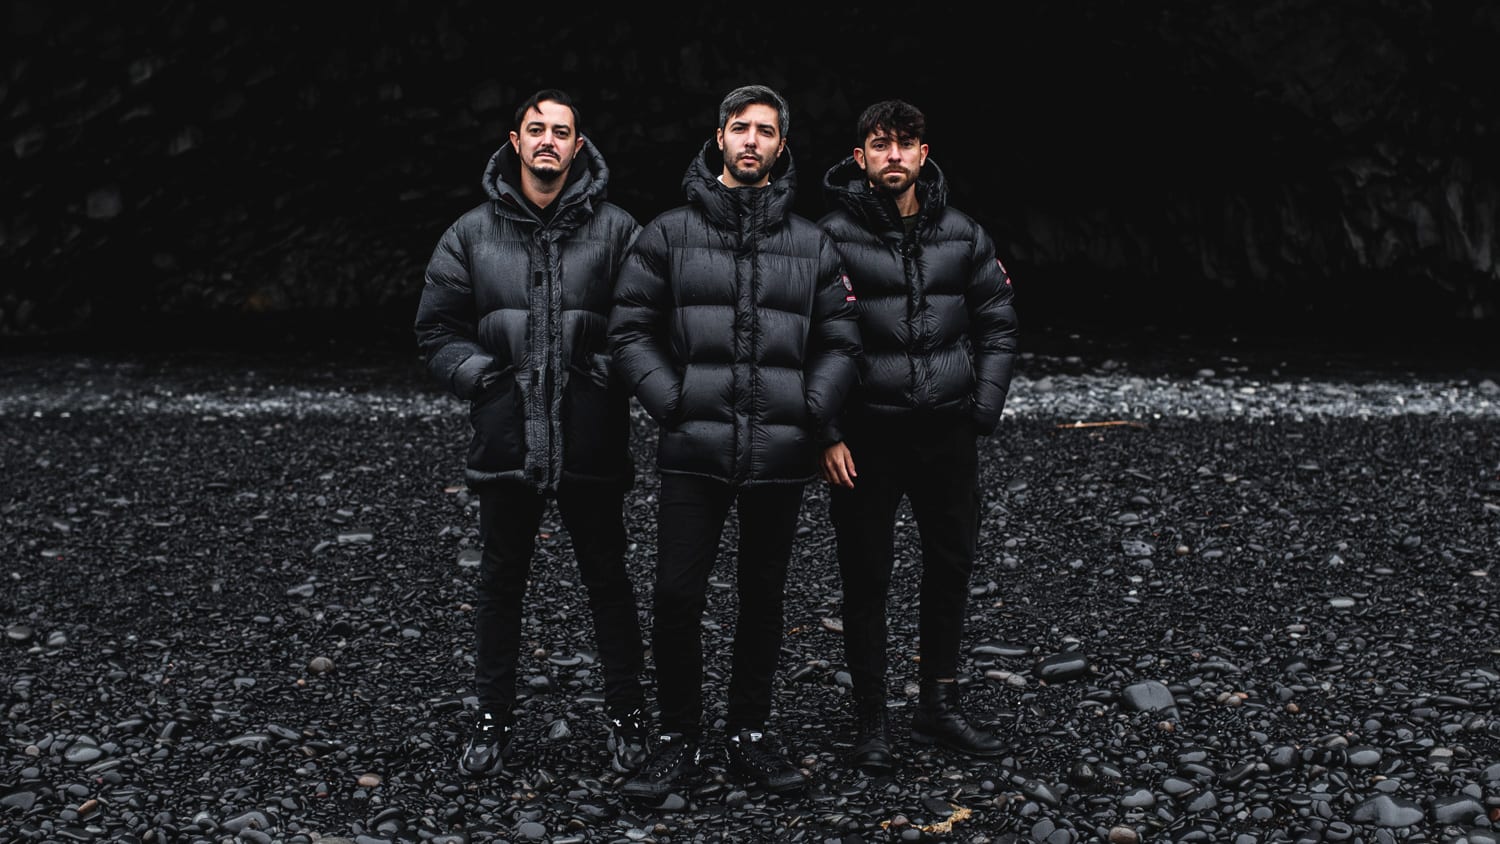 The three members of the band Meduza pictured on one of Iceland's famous black sand beaches wearing all black clothing